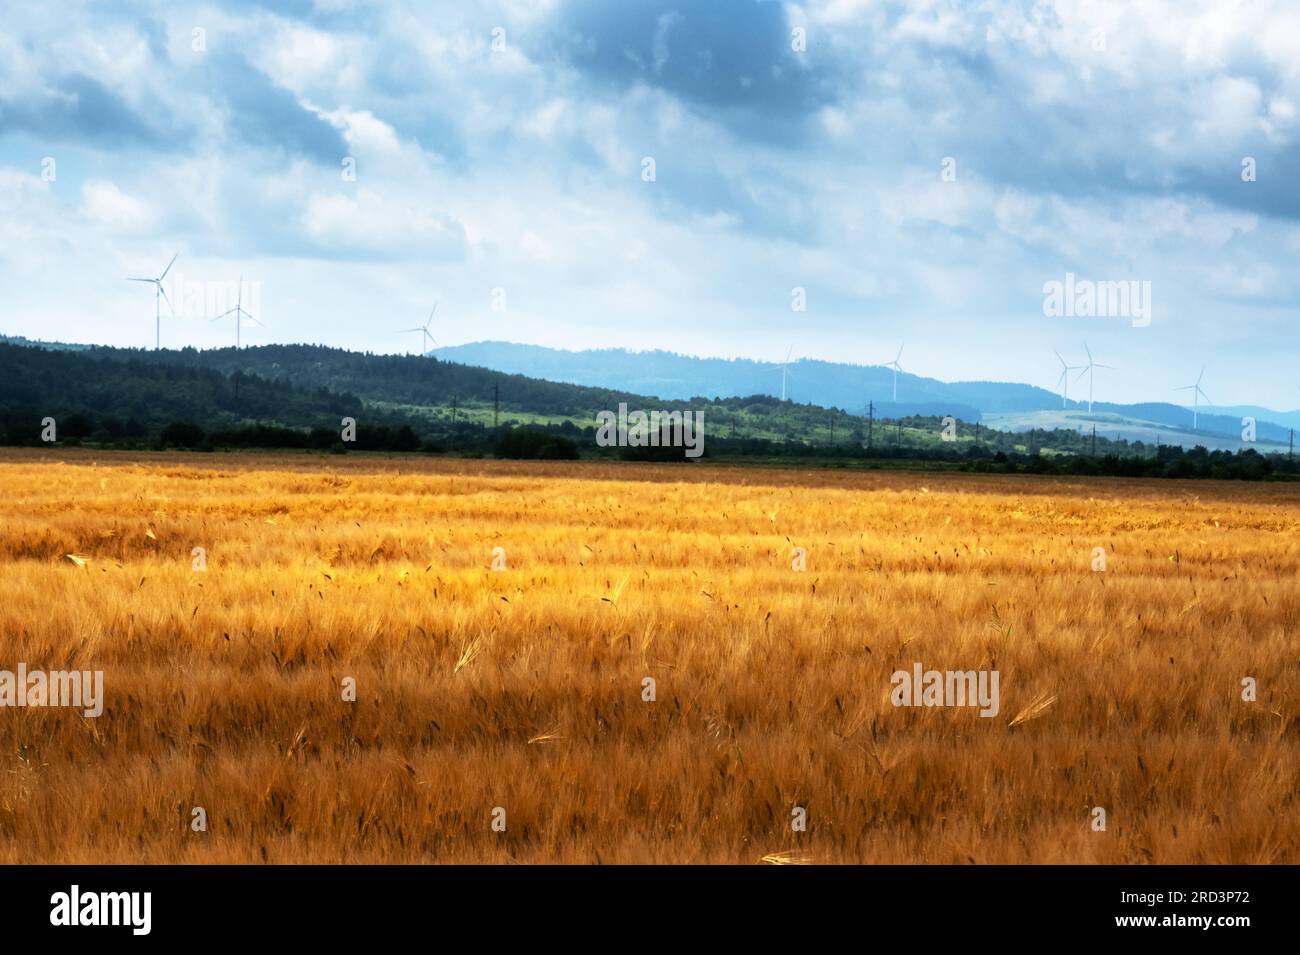 Ripe barley field infront blue sky with fluffy clouds. Wind turbines on background. Industrial and agricultural landscape. Ukraine, Europe Stock Photo